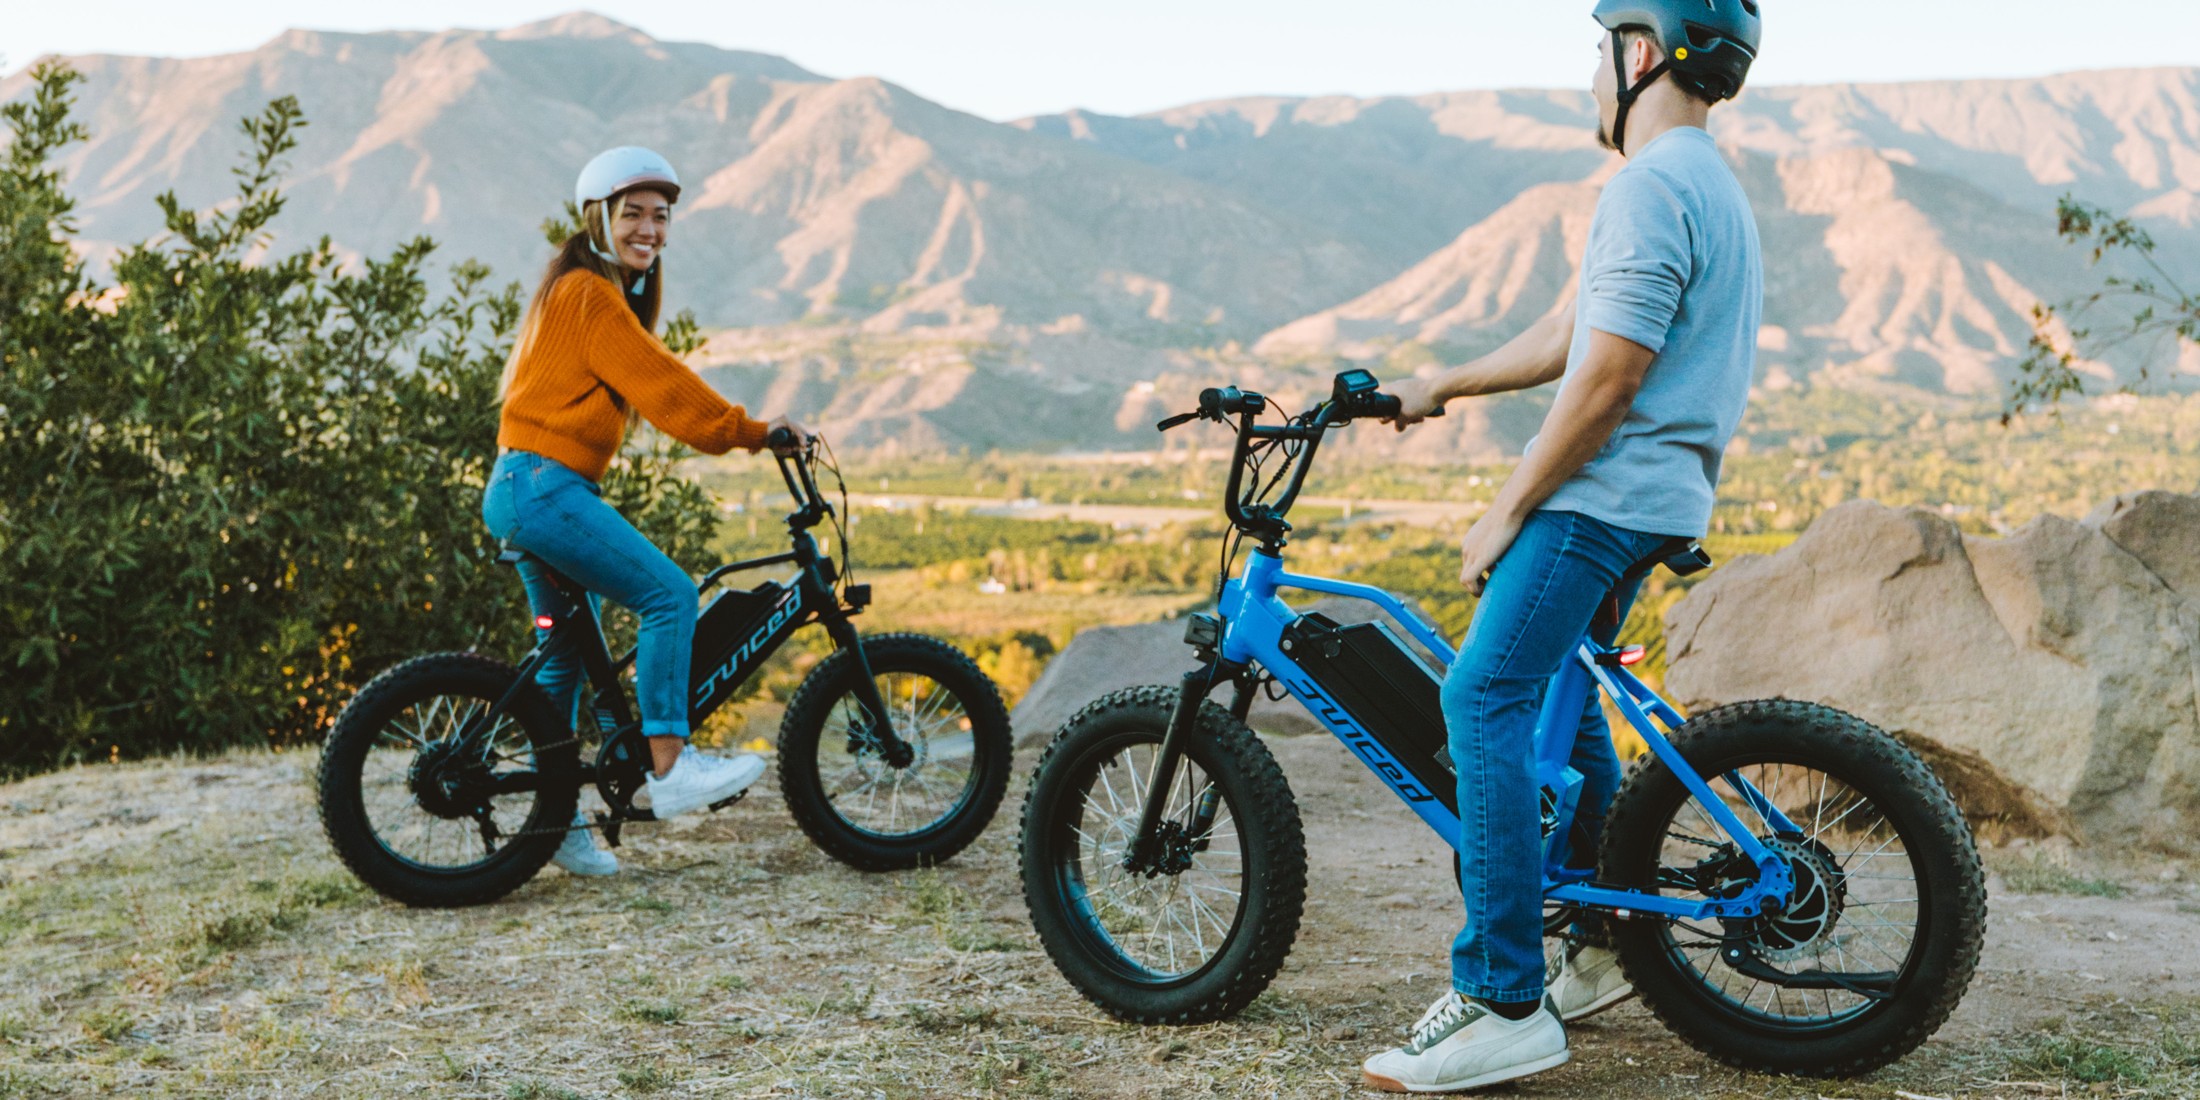 Juiced RipRacer unveiled as 'fun-sized,' low-cost 28 mph electric bike